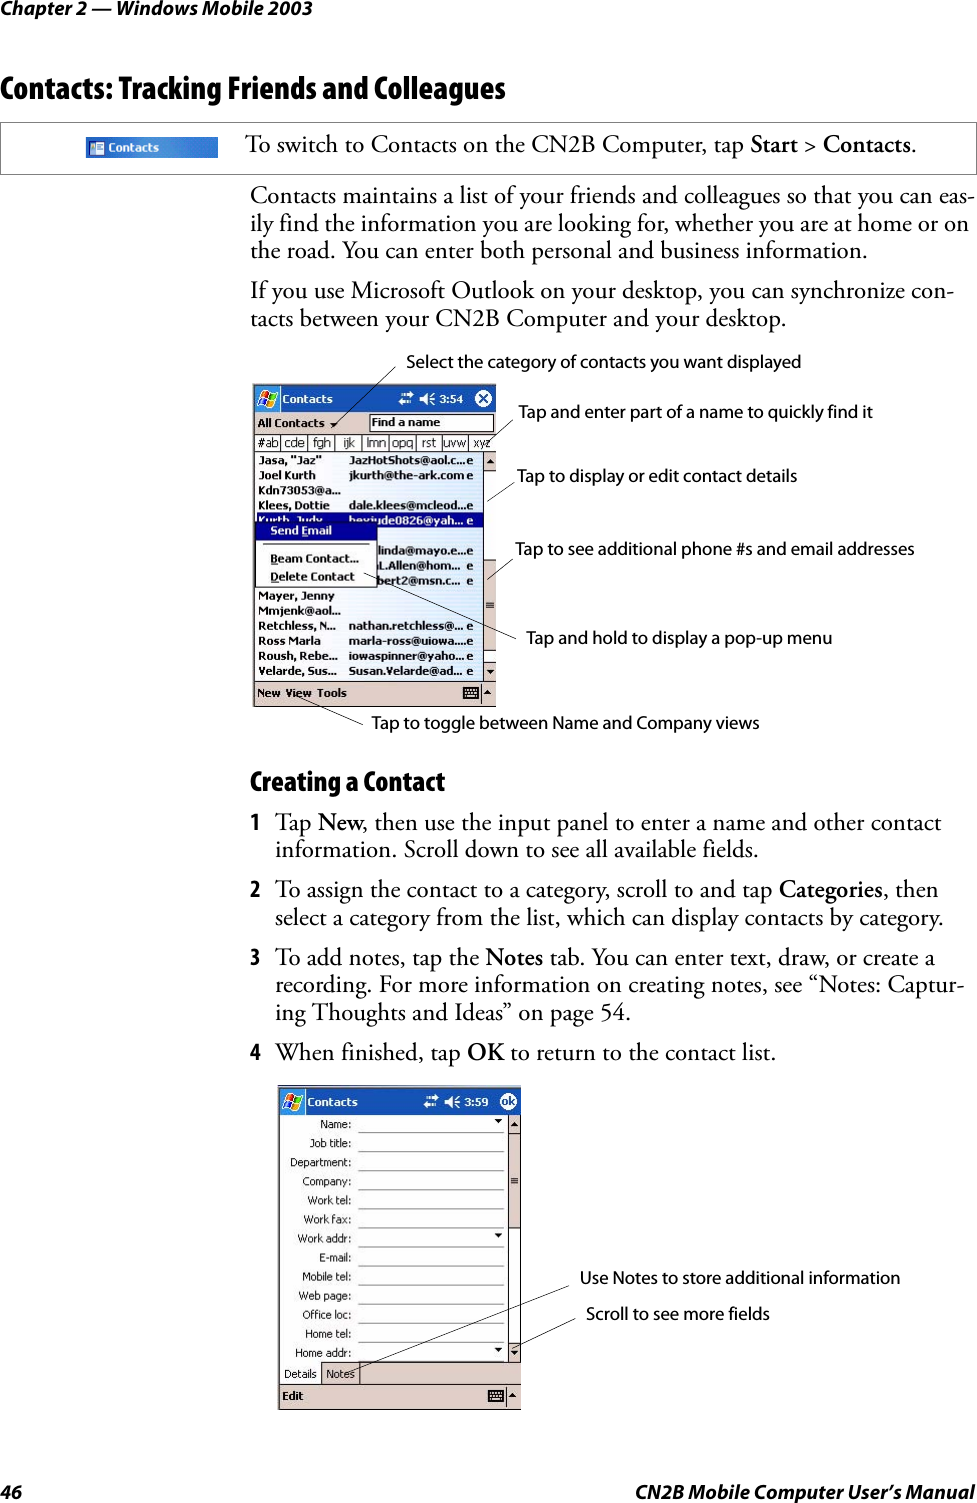 Chapter 2 — Windows Mobile 200346 CN2B Mobile Computer User’s ManualContacts: Tracking Friends and ColleaguesContacts maintains a list of your friends and colleagues so that you can eas-ily find the information you are looking for, whether you are at home or on the road. You can enter both personal and business information.If you use Microsoft Outlook on your desktop, you can synchronize con-tacts between your CN2B Computer and your desktop.Creating a Contact1Tap New, then use the input panel to enter a name and other contact information. Scroll down to see all available fields.2To assign the contact to a category, scroll to and tap Categories, then select a category from the list, which can display contacts by category.3To add notes, tap the Notes tab. You can enter text, draw, or create a recording. For more information on creating notes, see “Notes: Captur-ing Thoughts and Ideas” on page 54.4When finished, tap OK to return to the contact list.To switch to Contacts on the CN2B Computer, tap Start &gt; Contacts.Select the category of contacts you want displayedTap and enter part of a name to quickly find itTap to see additional phone #s and email addressesTap to display or edit contact detailsTap and hold to display a pop-up menuTap to toggle between Name and Company viewsScroll to see more fieldsUse Notes to store additional information